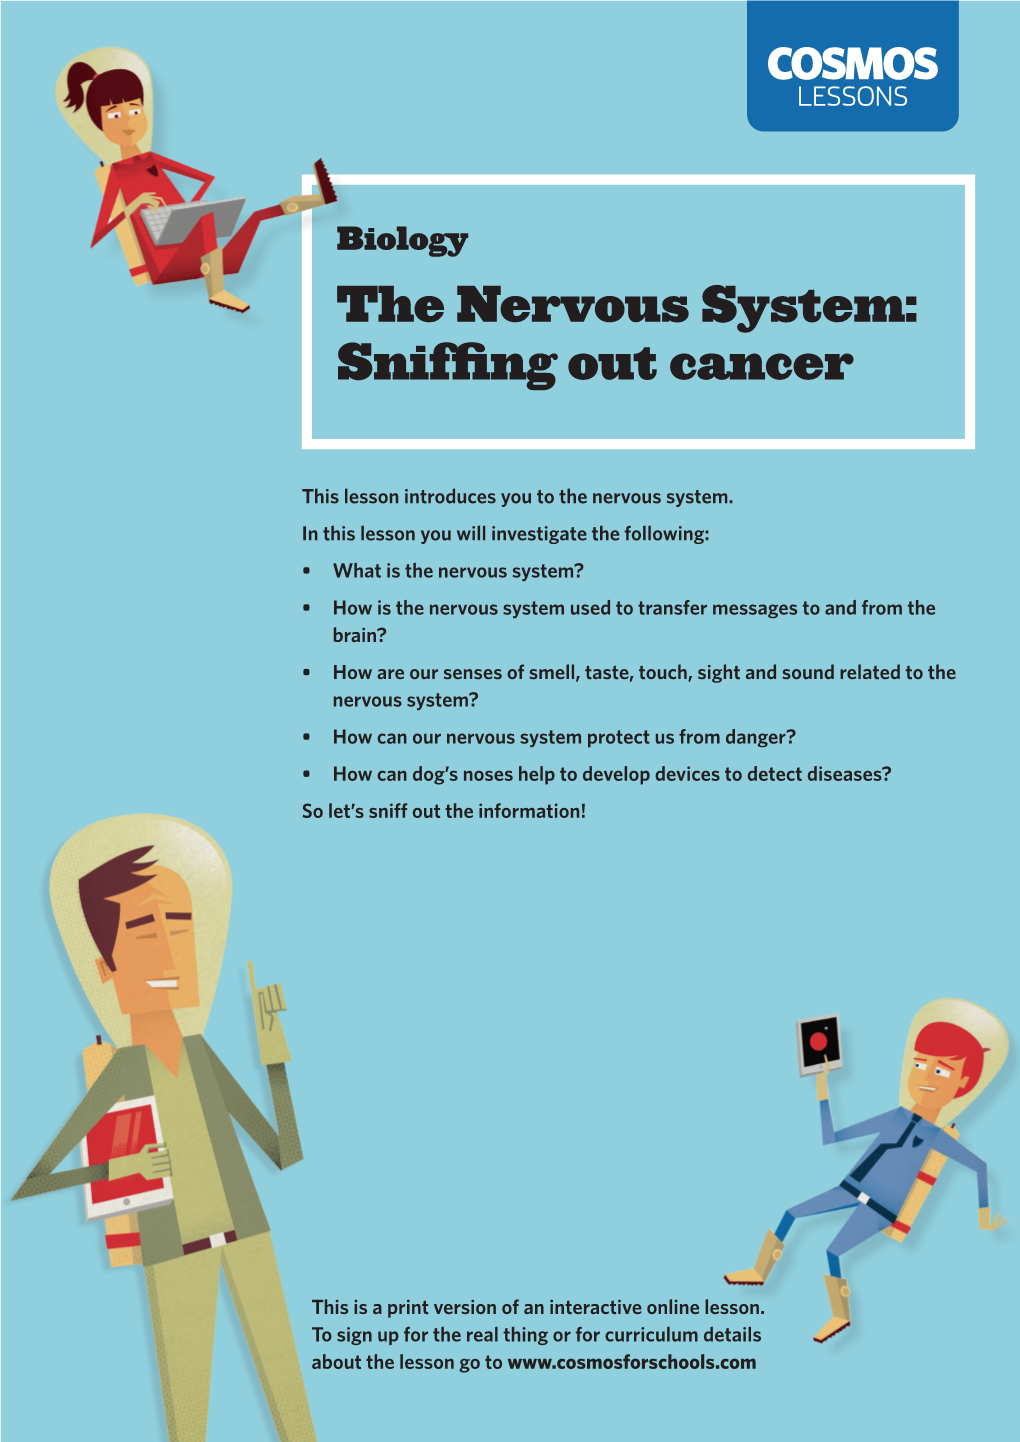 The Nervous System: Sniffing out Cancer